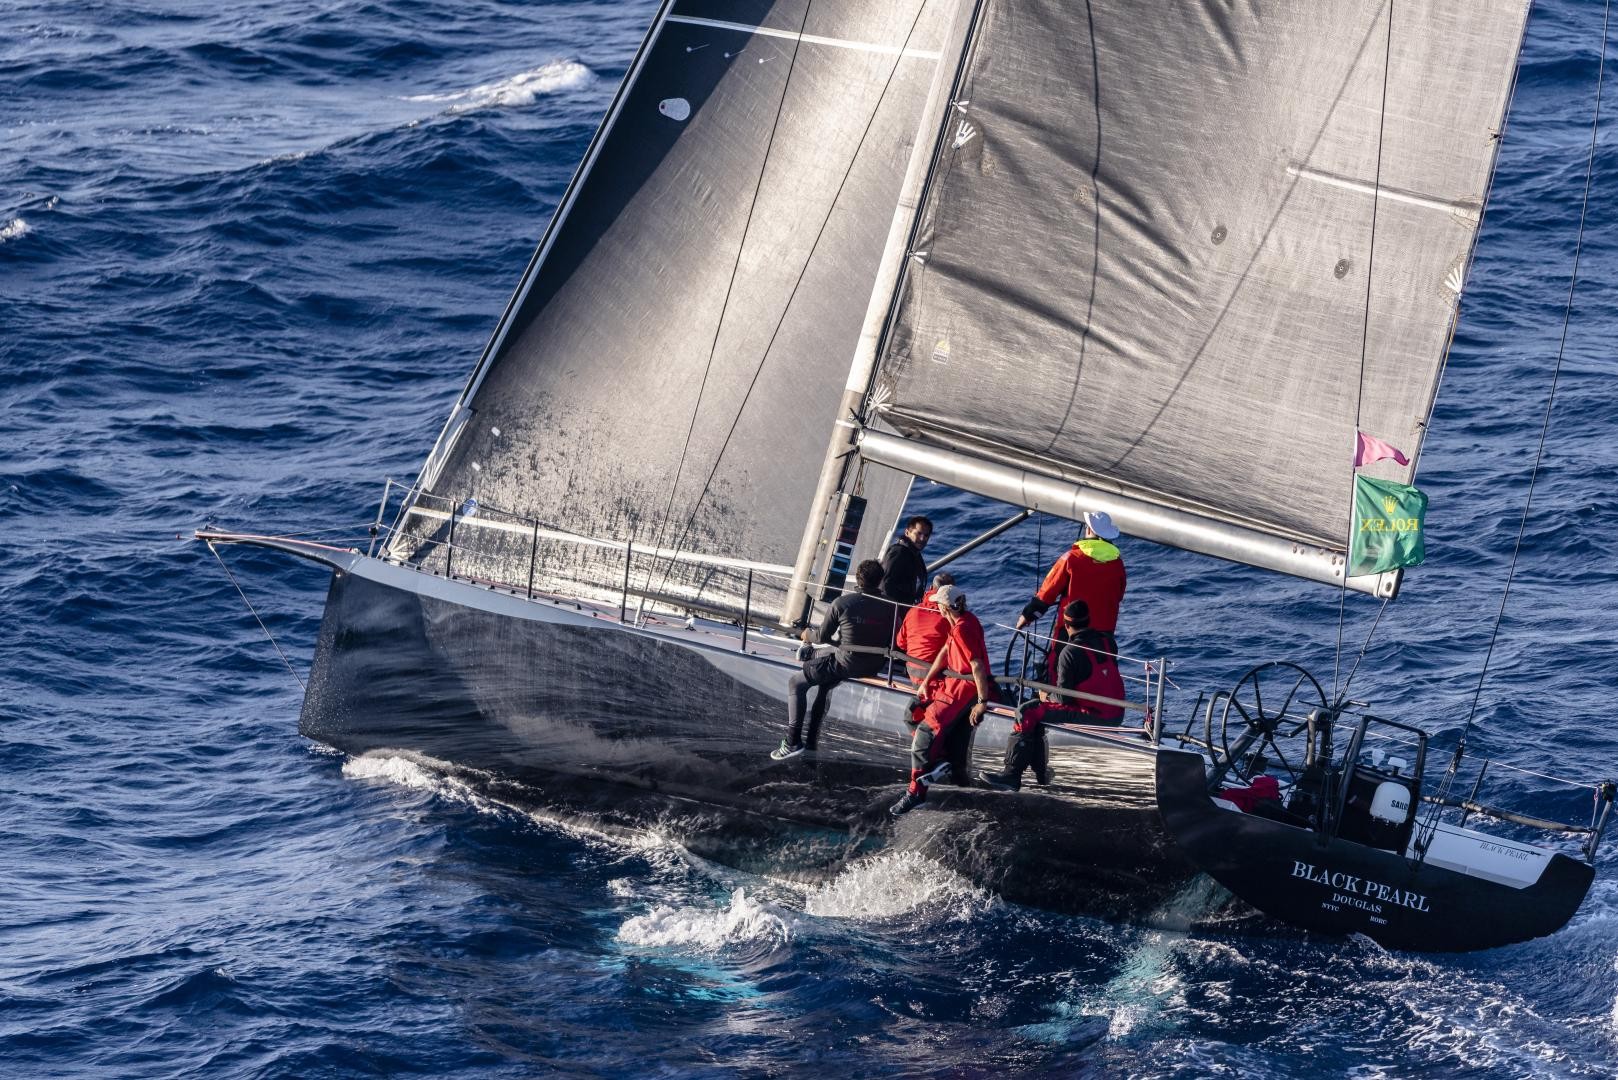 2019 Rolex Middle Sea Race: Out with the old, In with the New